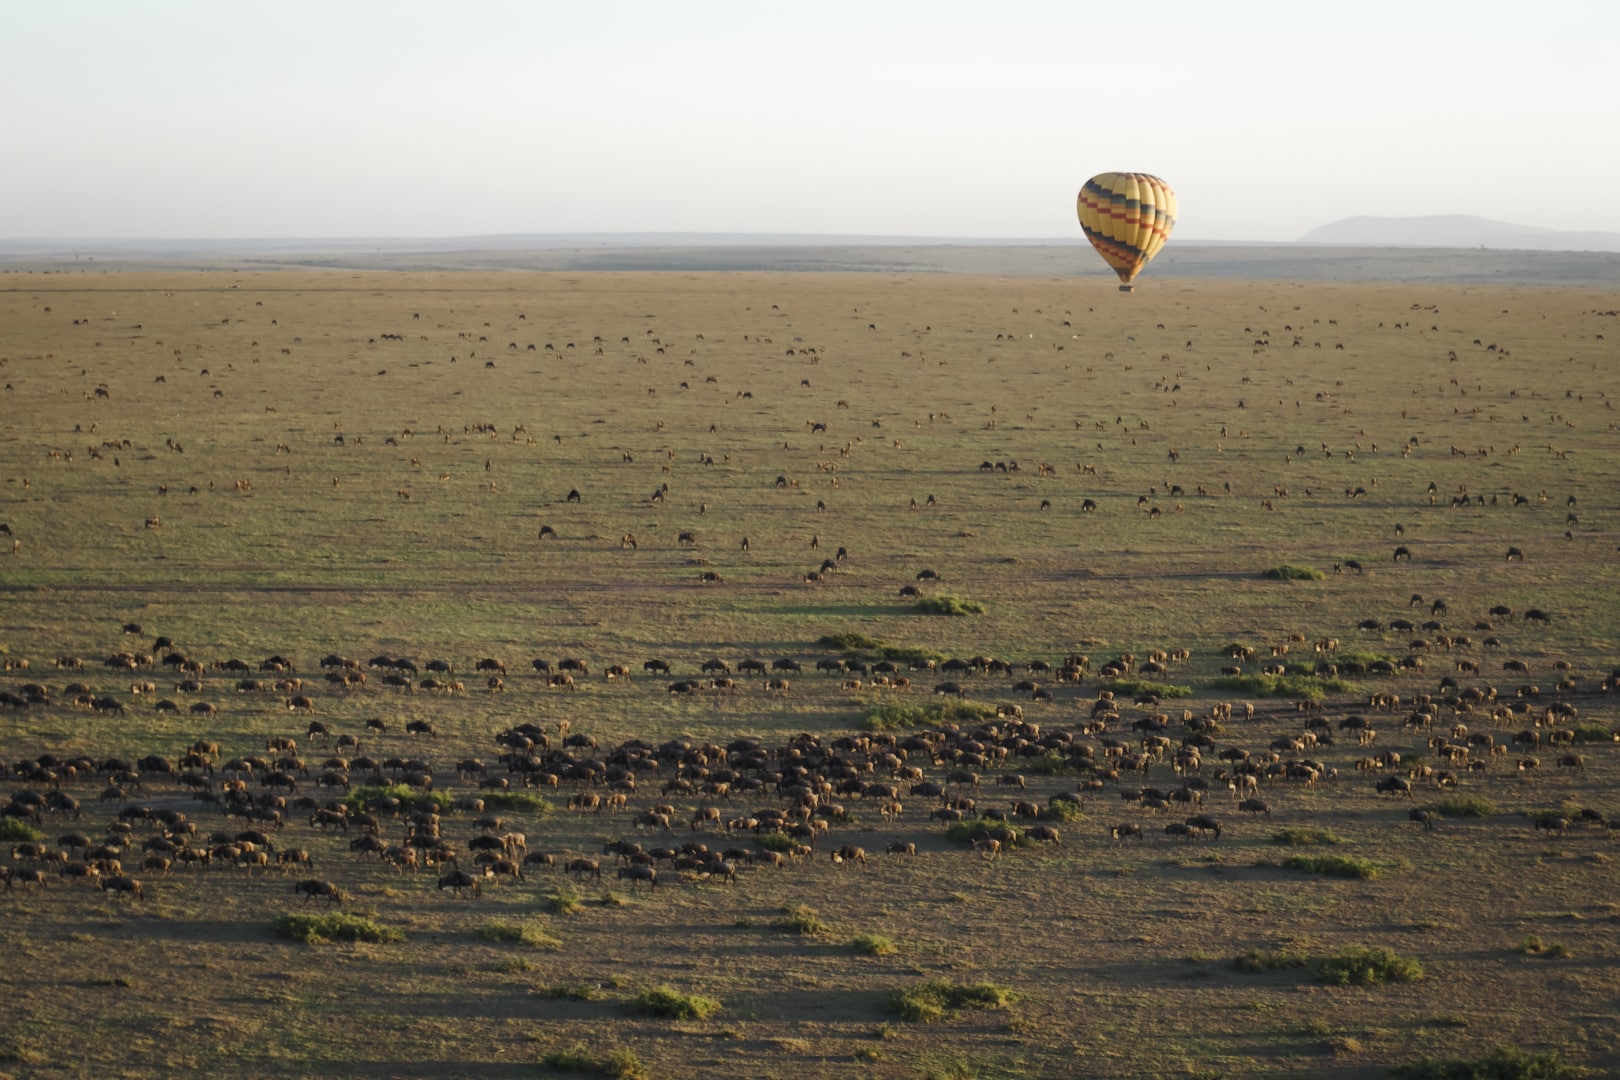 A hot air balloon floats over a herd of wildebeest in the Serengeti National Park – the home of Lemala Kuria Hills.